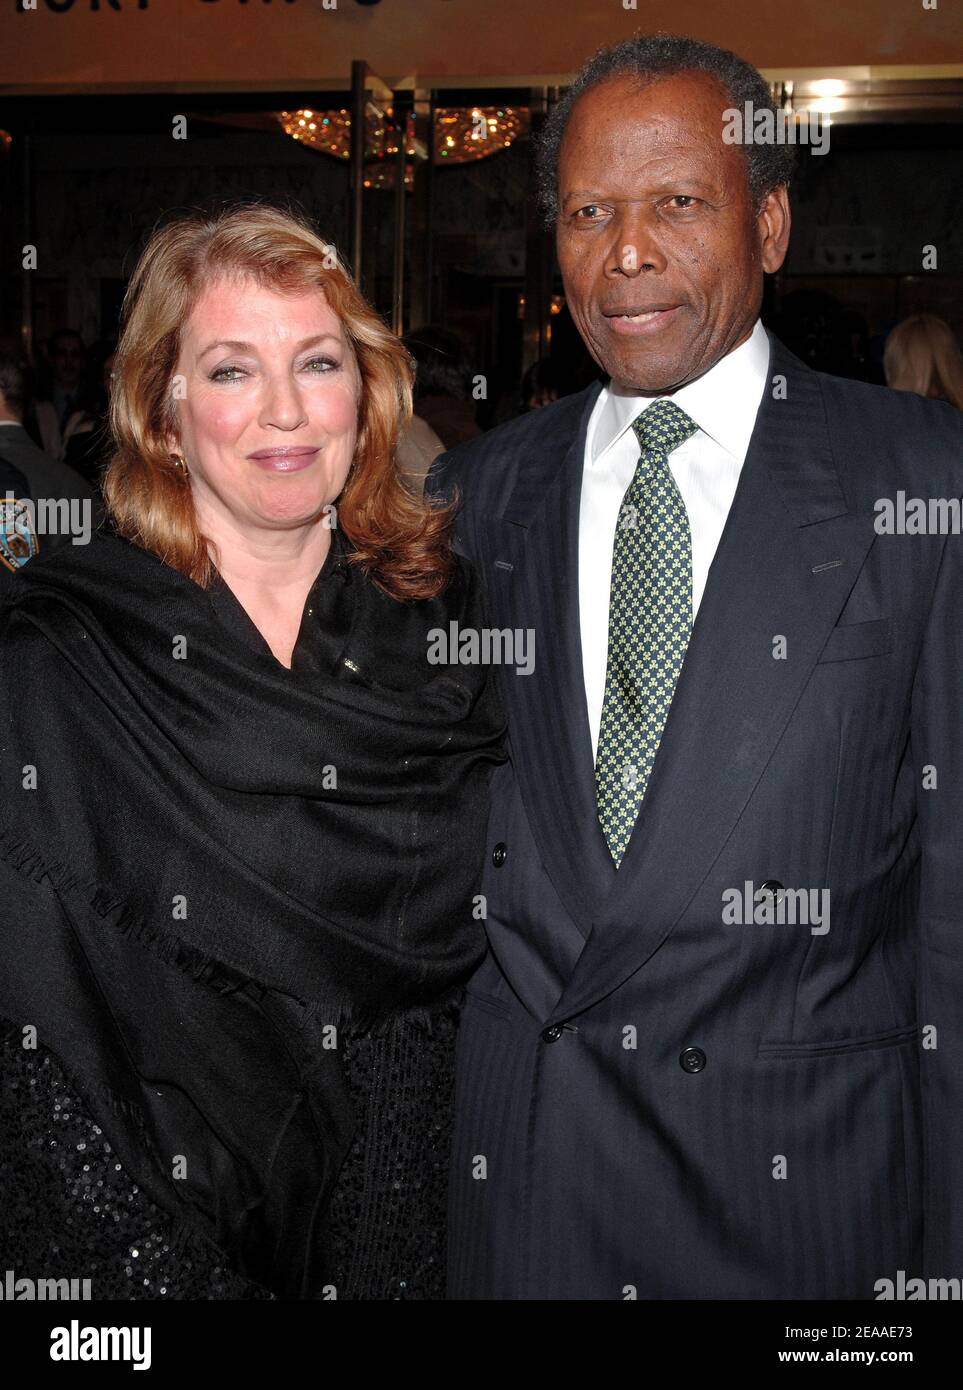 Actor Sidney Poitier and his wife Joanna Shimkus arrive at the opening night for 'The Color Purple' at the Broadway theatre in New York, on Thursday December 1, 2005. Photo by Nicolas Khayat/ABACAPRESS.COM Stock Photo